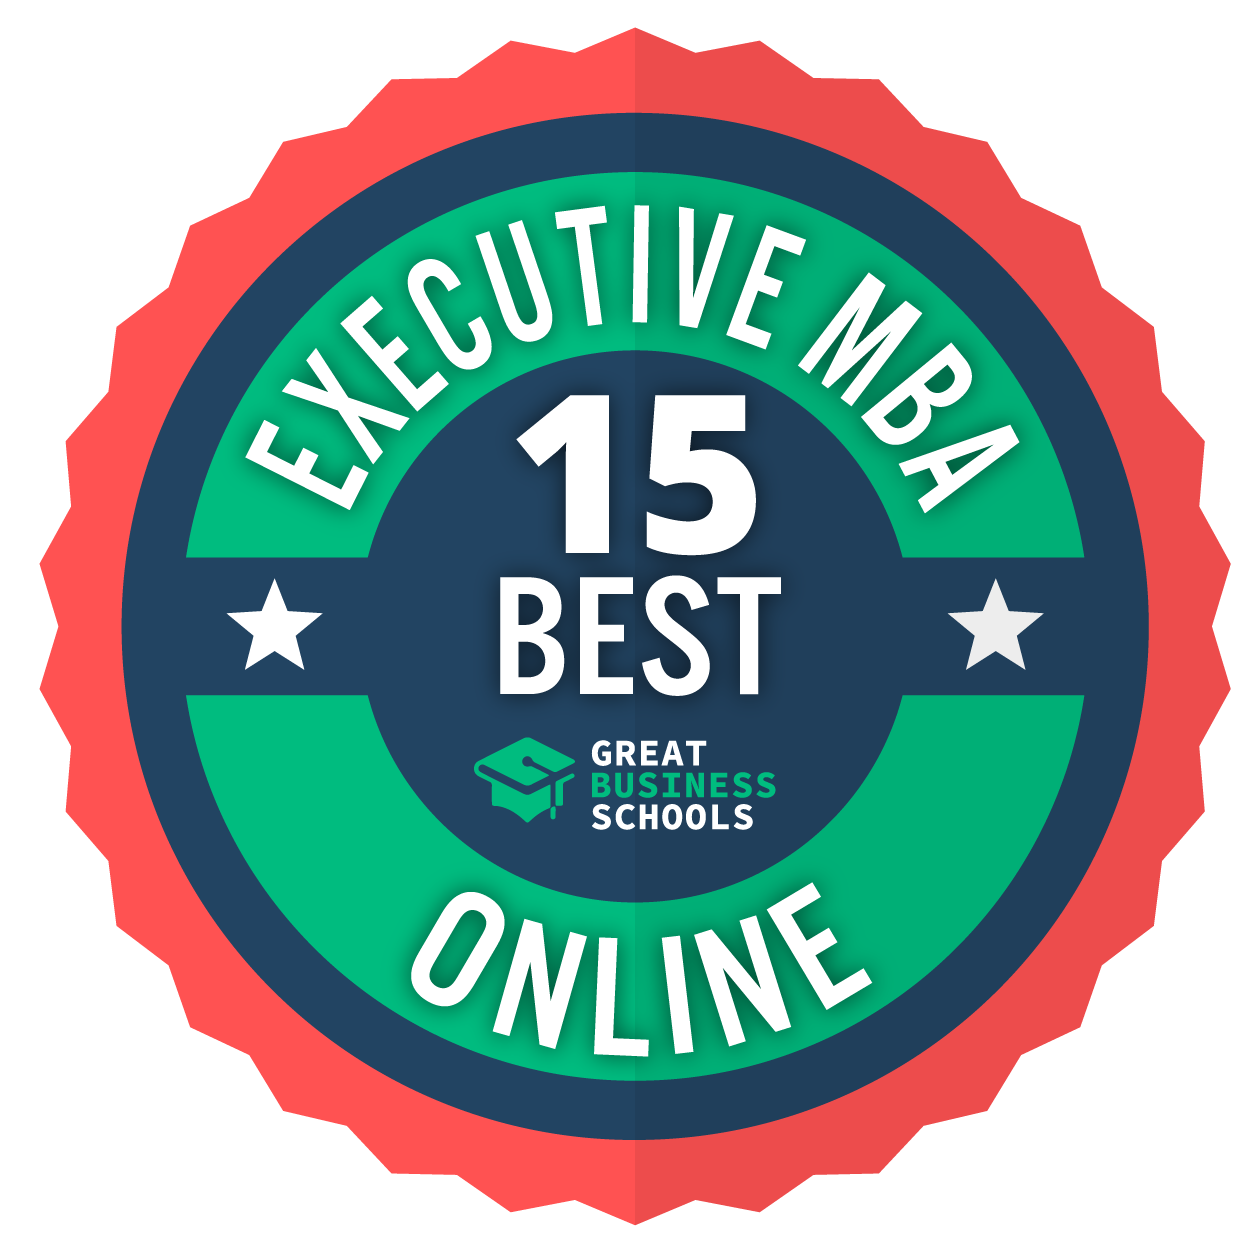 15 Best Online Executive MBA Degrees for 2021 - Business Schools